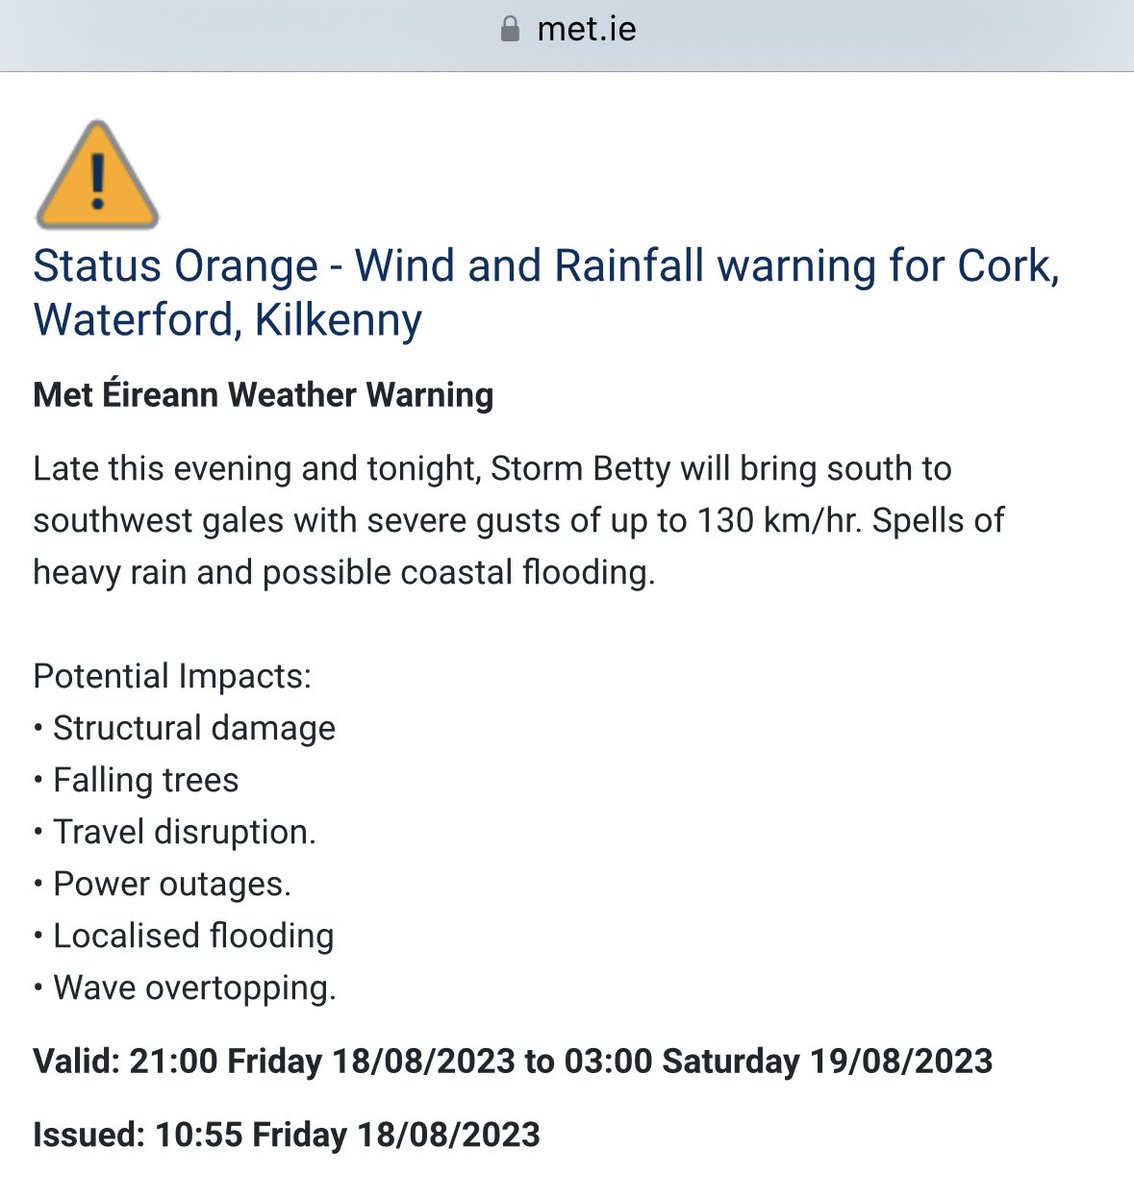 The storm has a name now #StormBetty with new Orange warnings issued for Wind and Rainfall for Cork, Waterford, Kilkenny